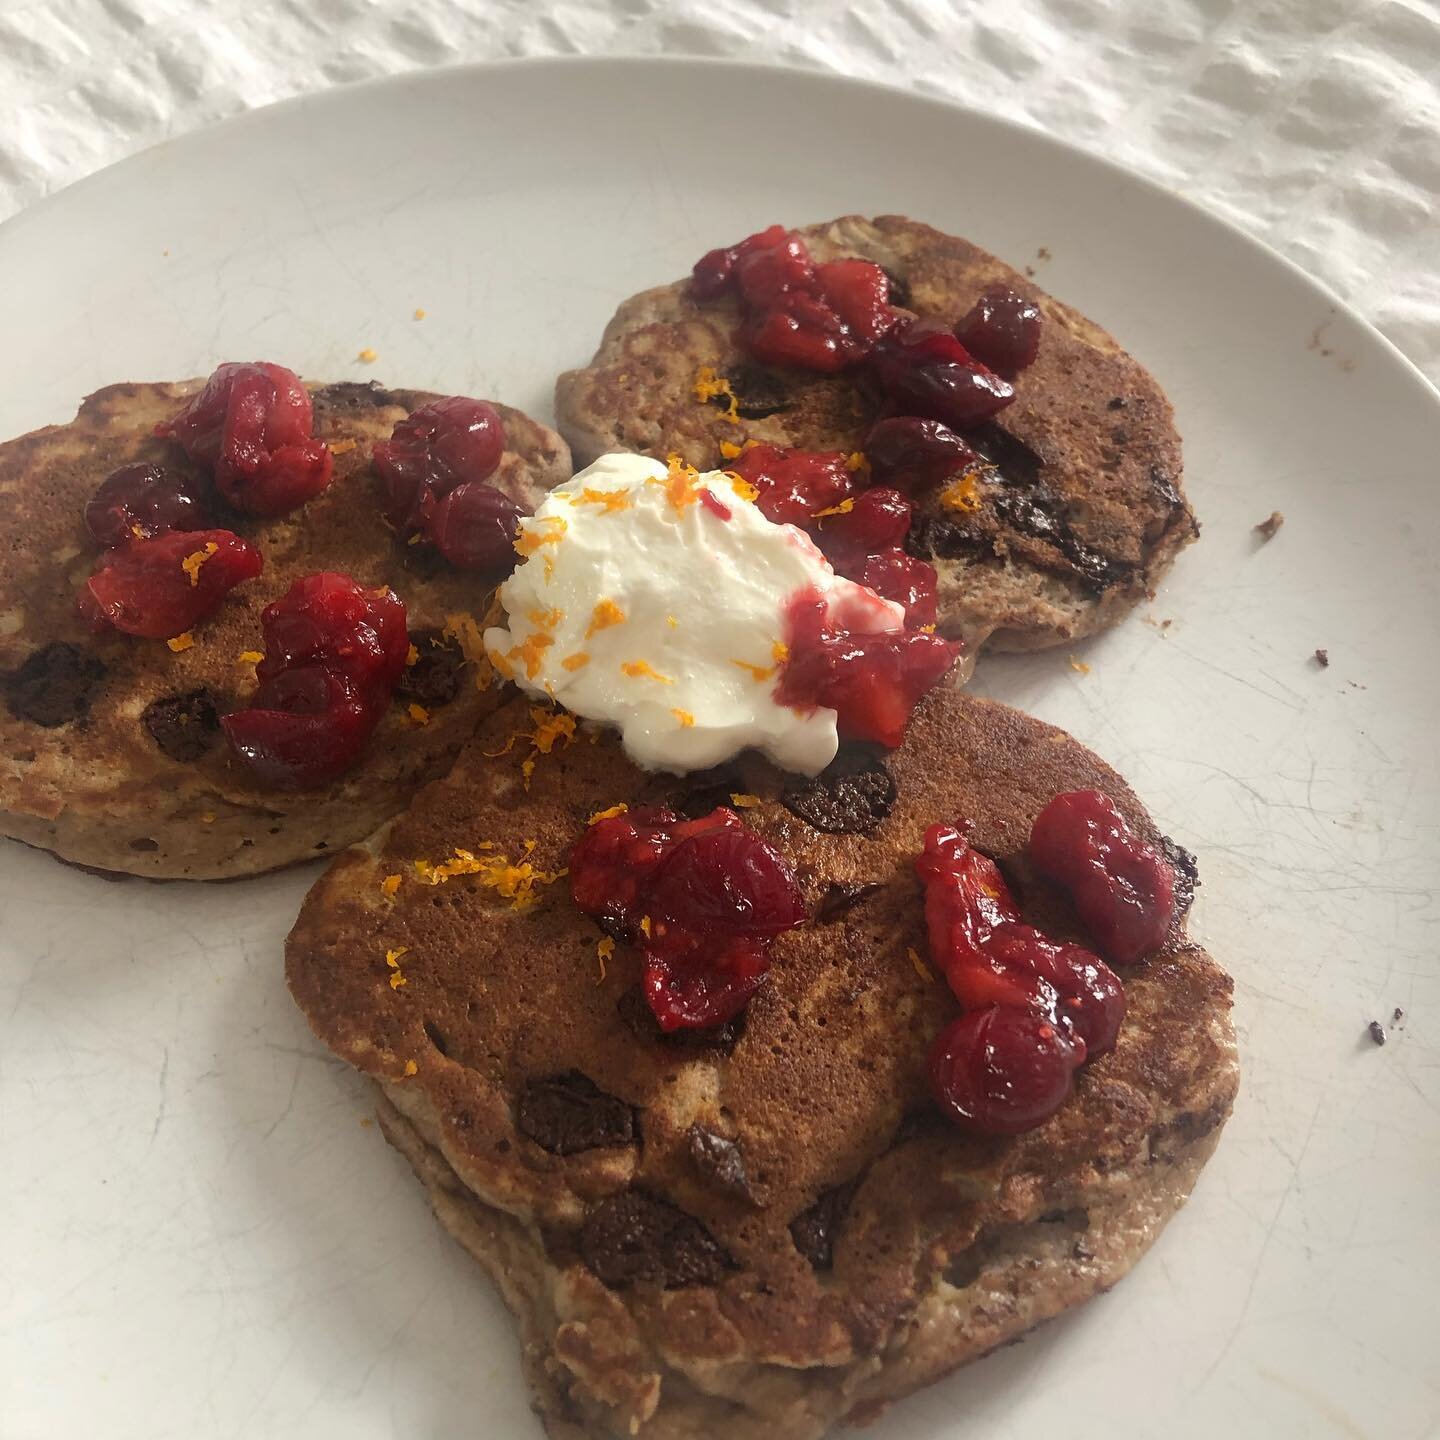 nice lil v day breakky for me n my mumma &hearts;️
chocolate chip &hearts;️ nanner panners 
strawberry cranberry sauce
lil skyr 
nd some orange zest to top it up!!!